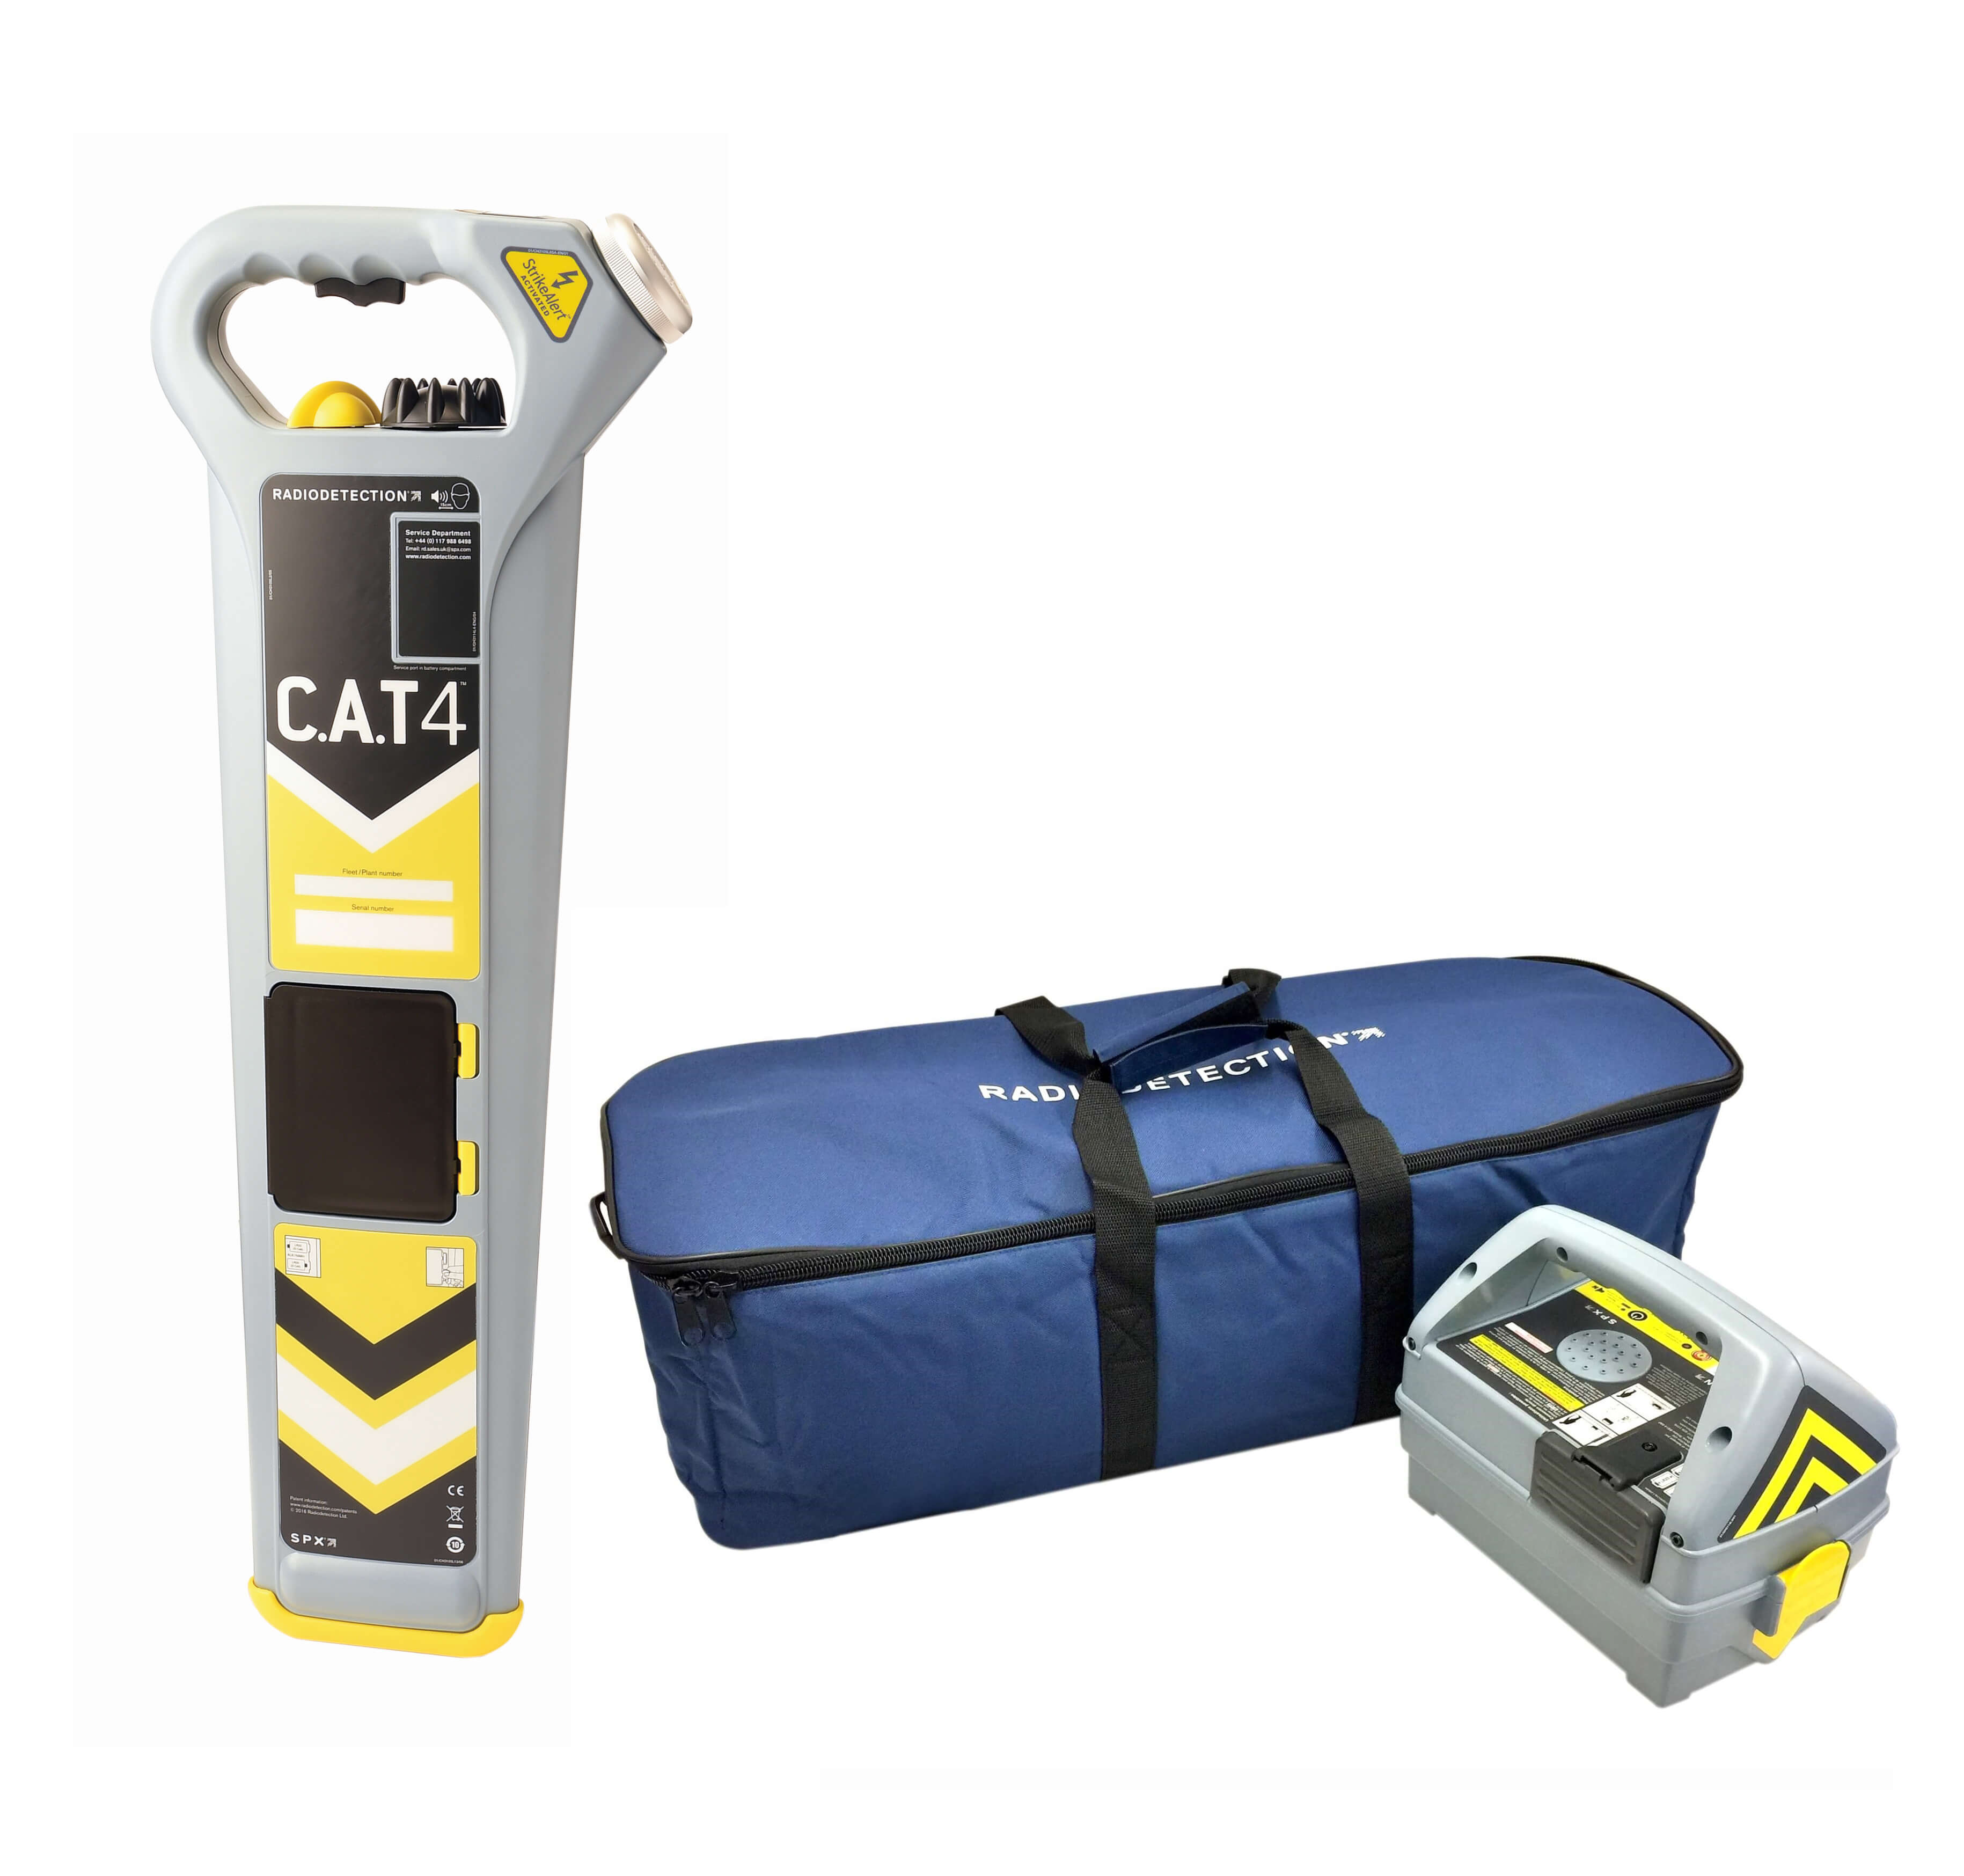 Radiodetection CAT4 Kit with Genny4 and Bag